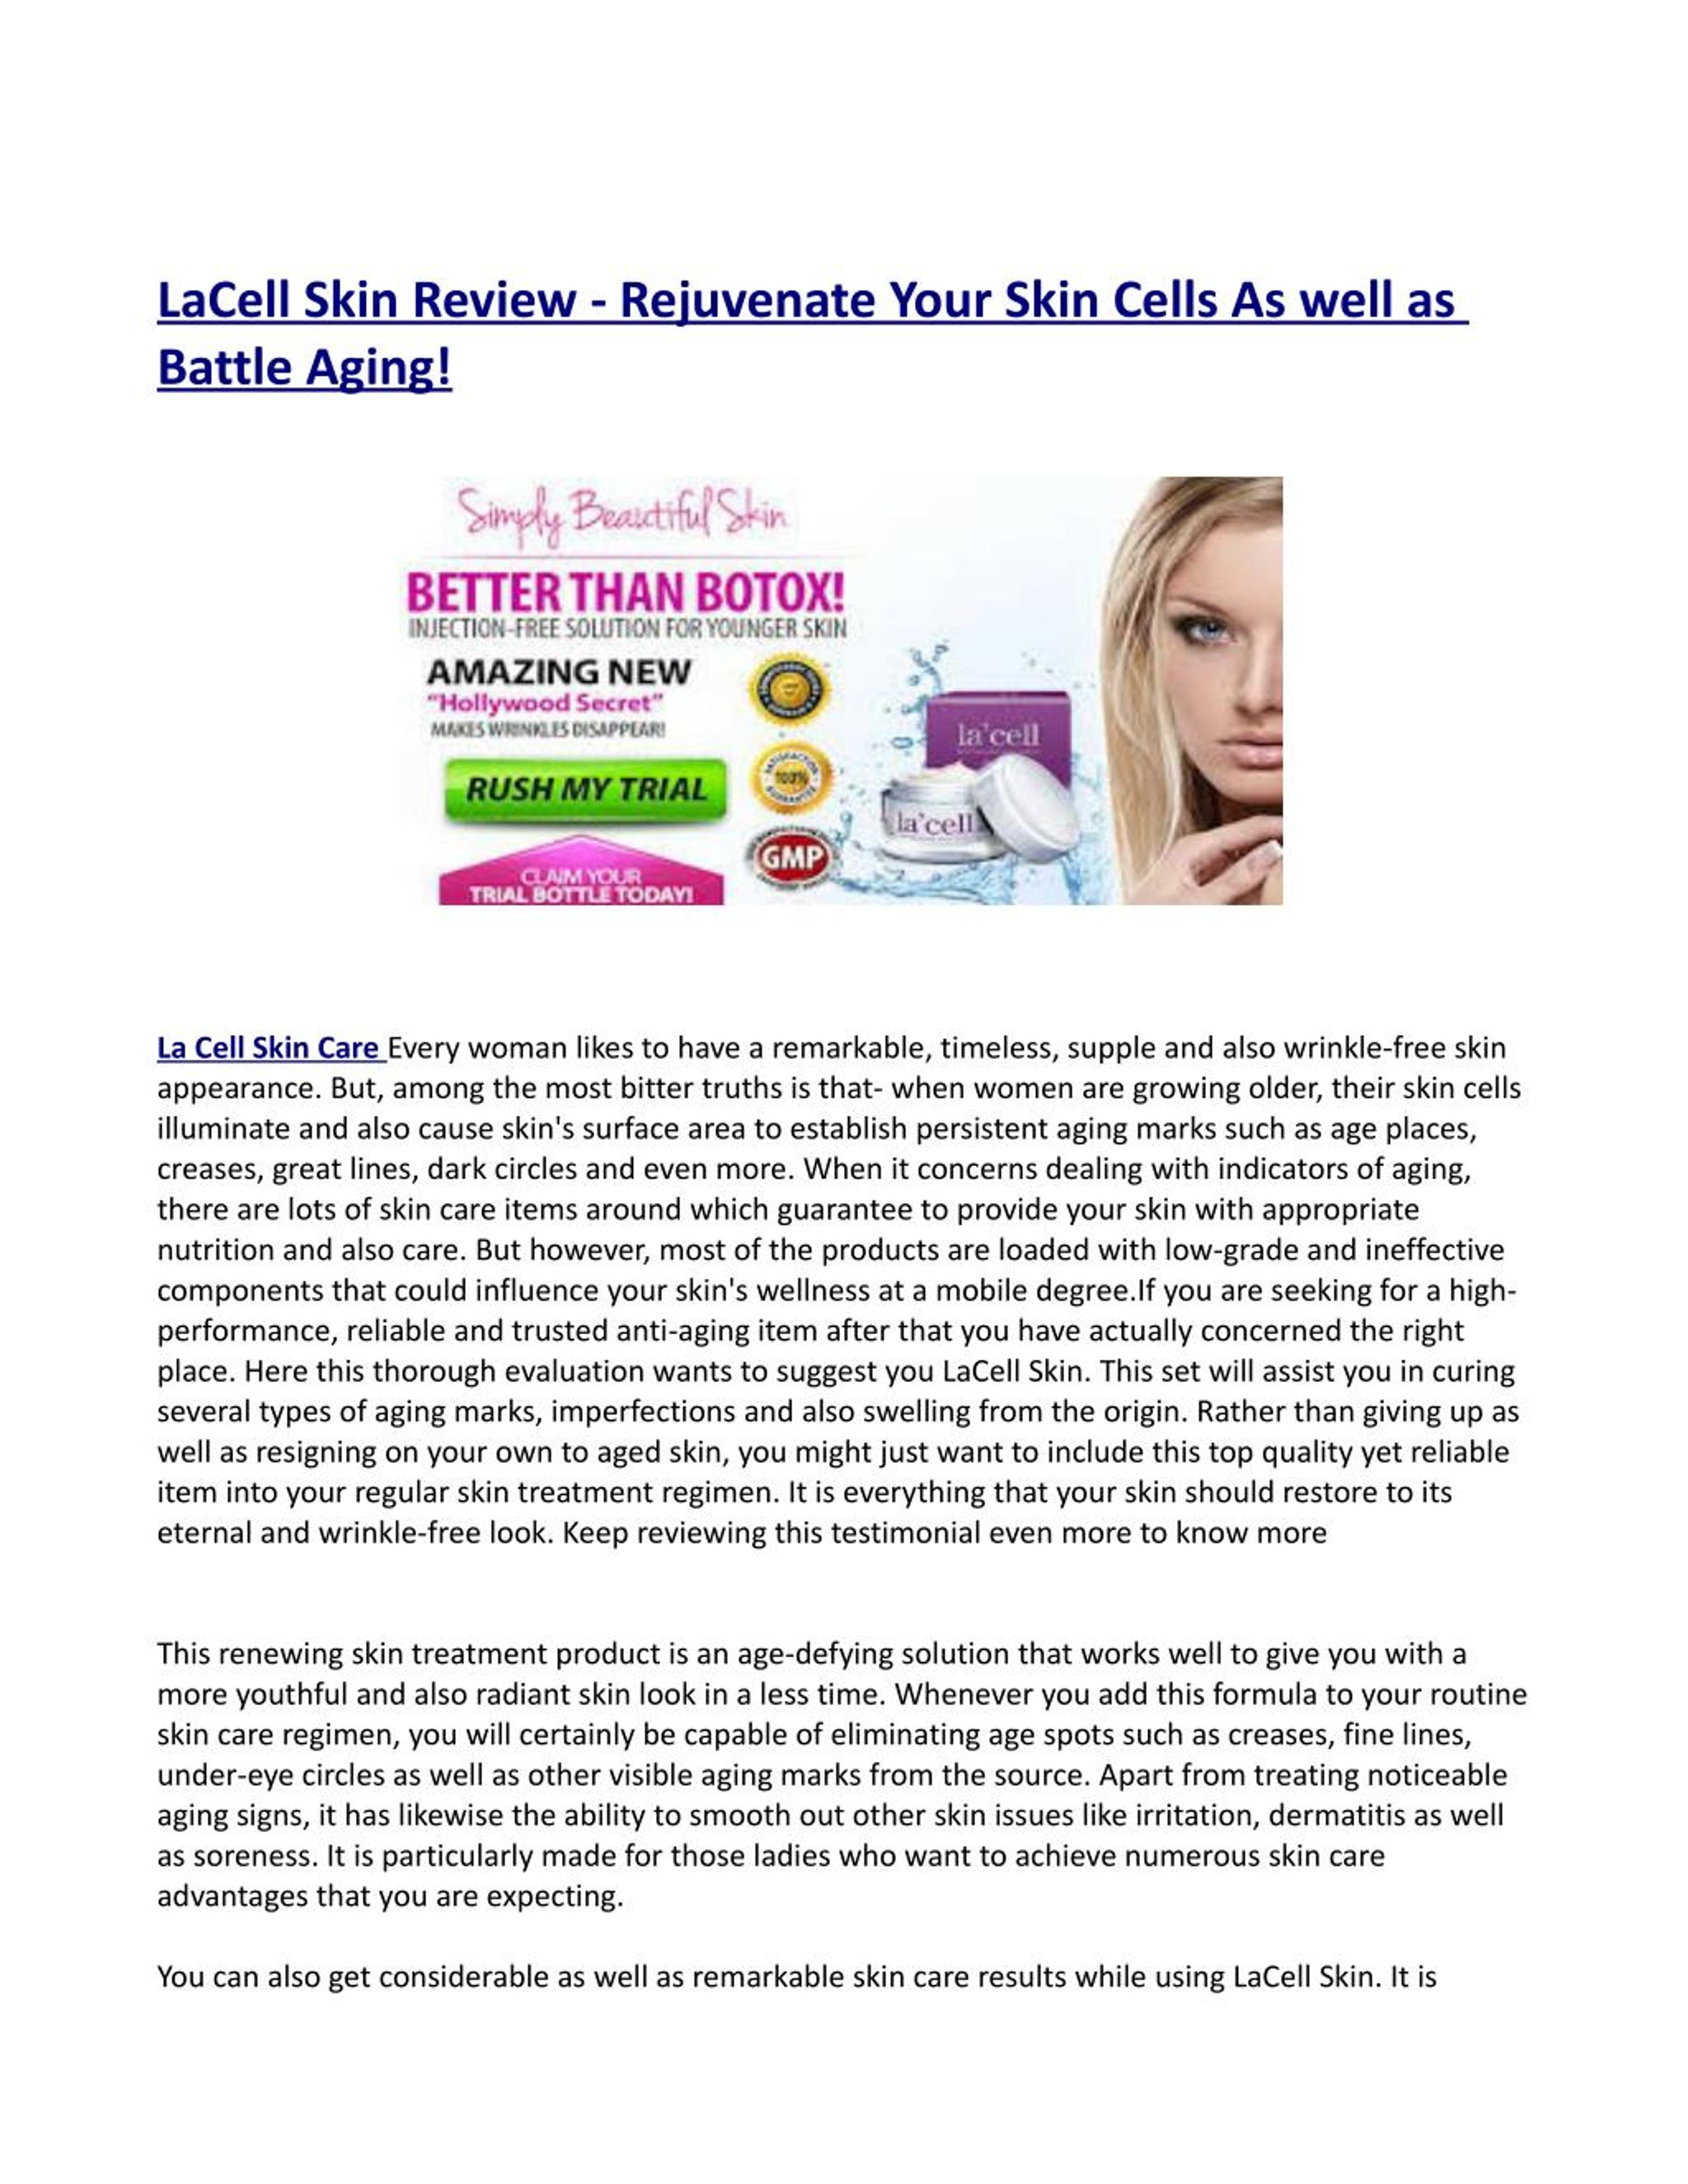 PPT - La Cell Skin Care Pricing & Return Plan? PowerPoint Presentation ...